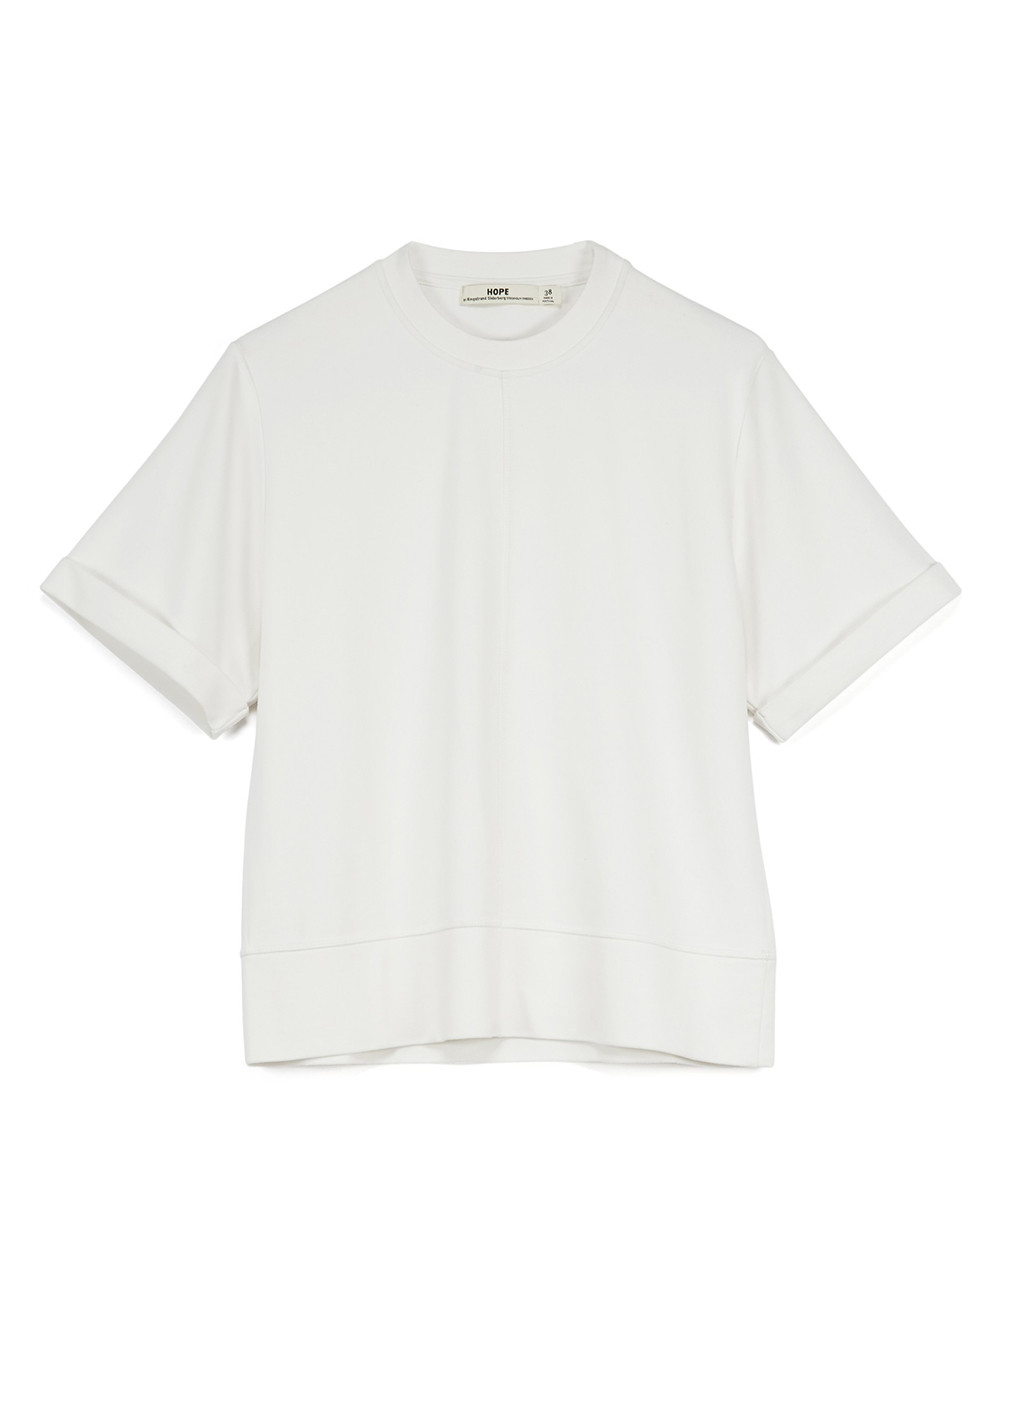 hope-sing-tee-nearly-white-front